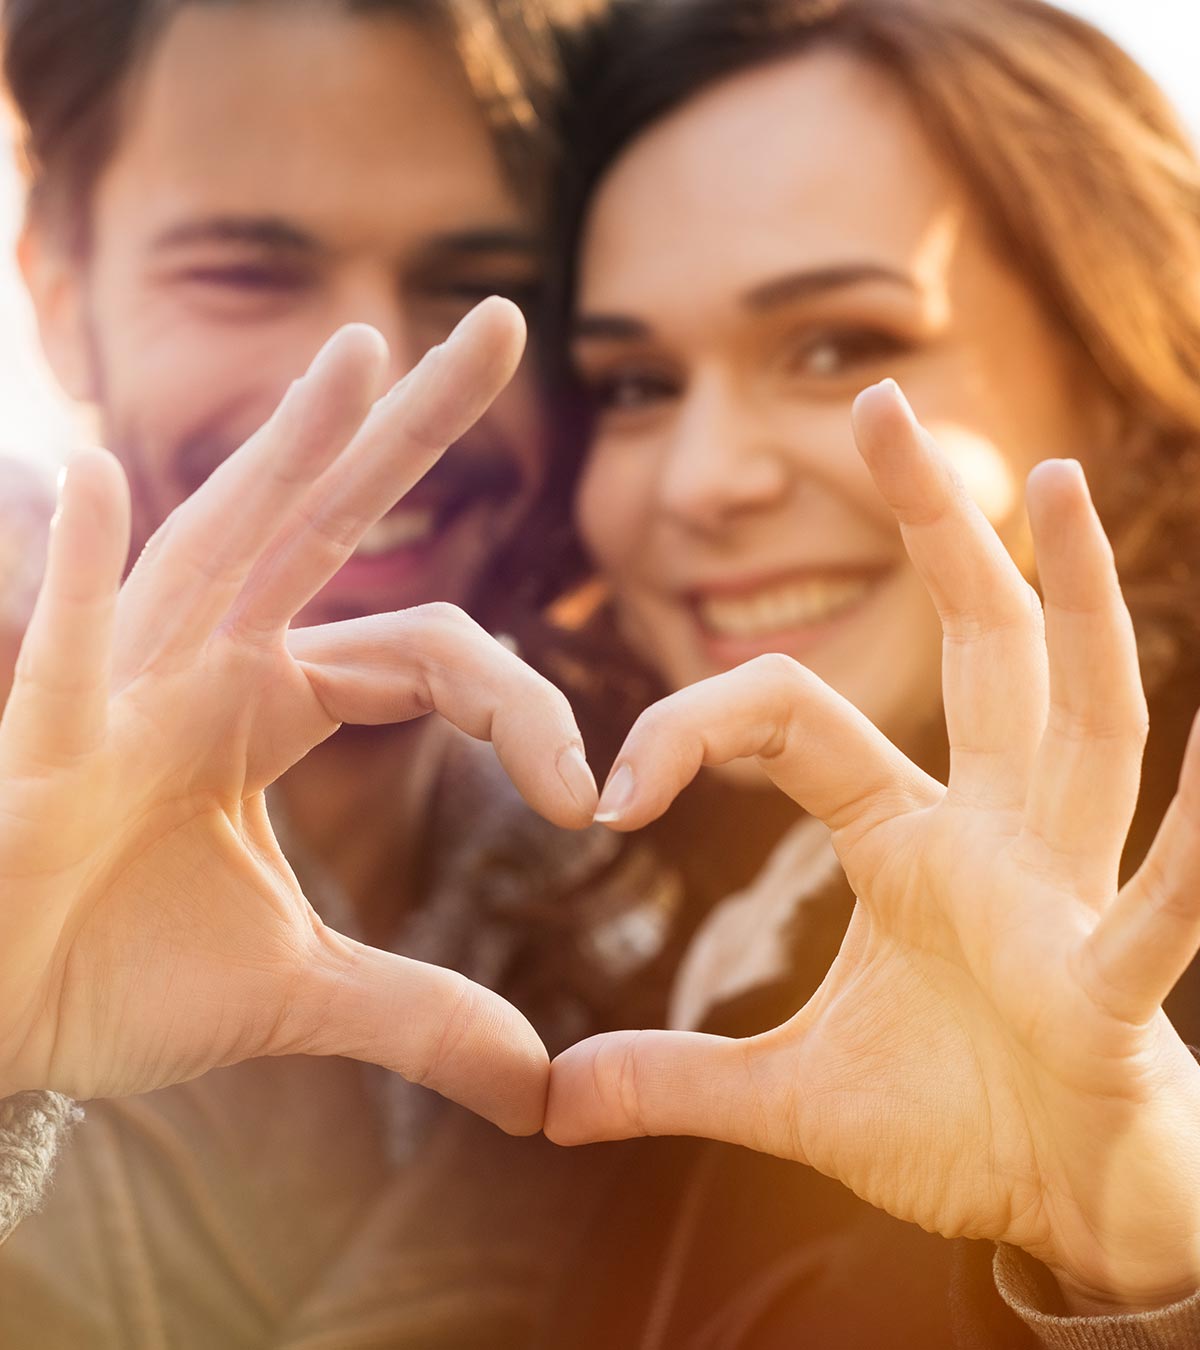 25 Unique Symbols Of Love And Their Meanings